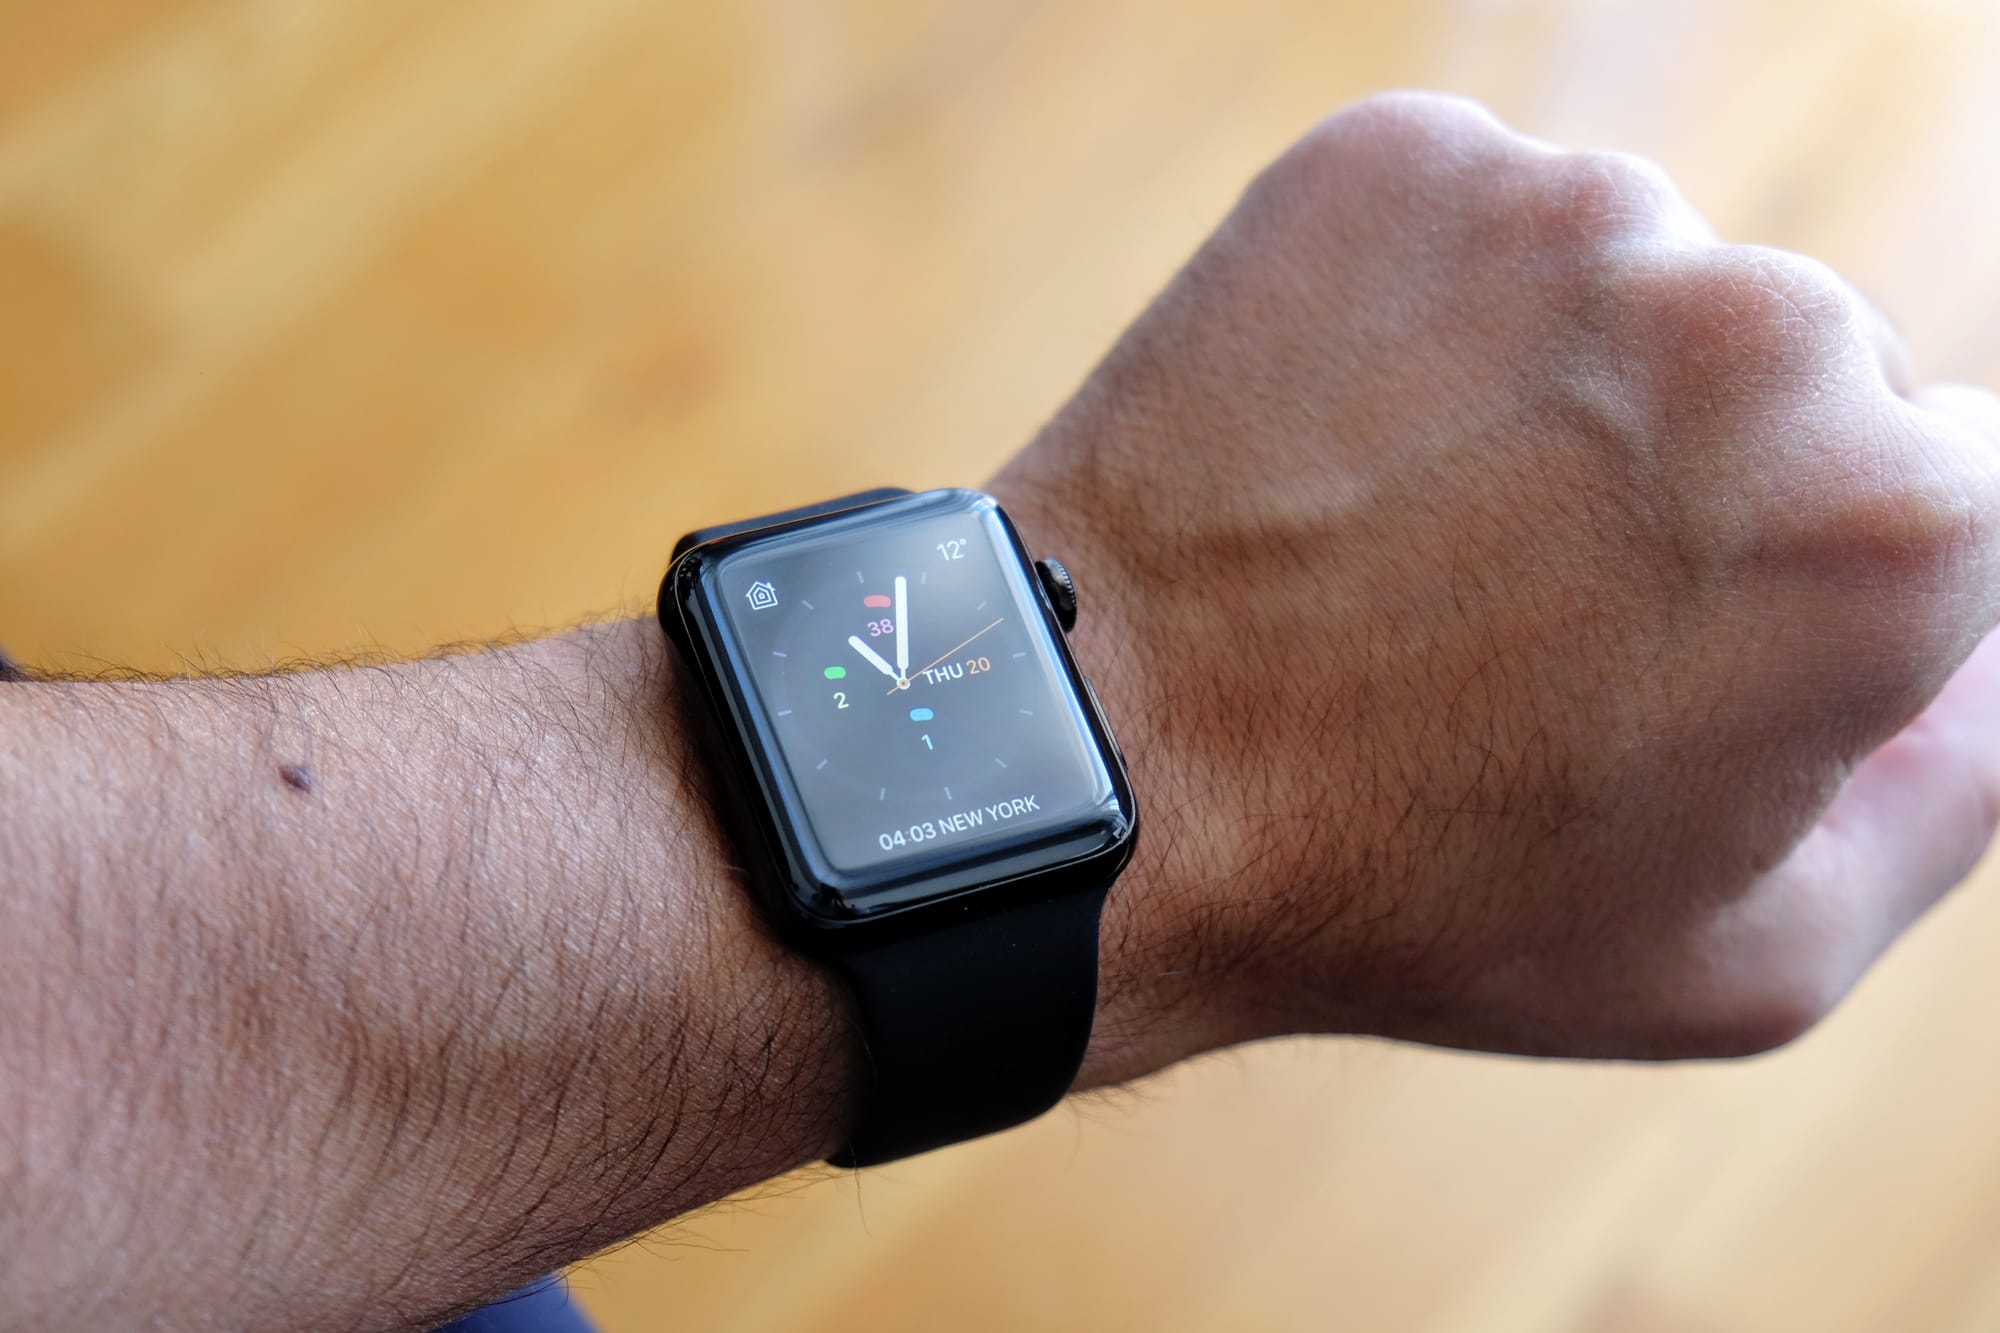 The ups and downs with my Apple Watch